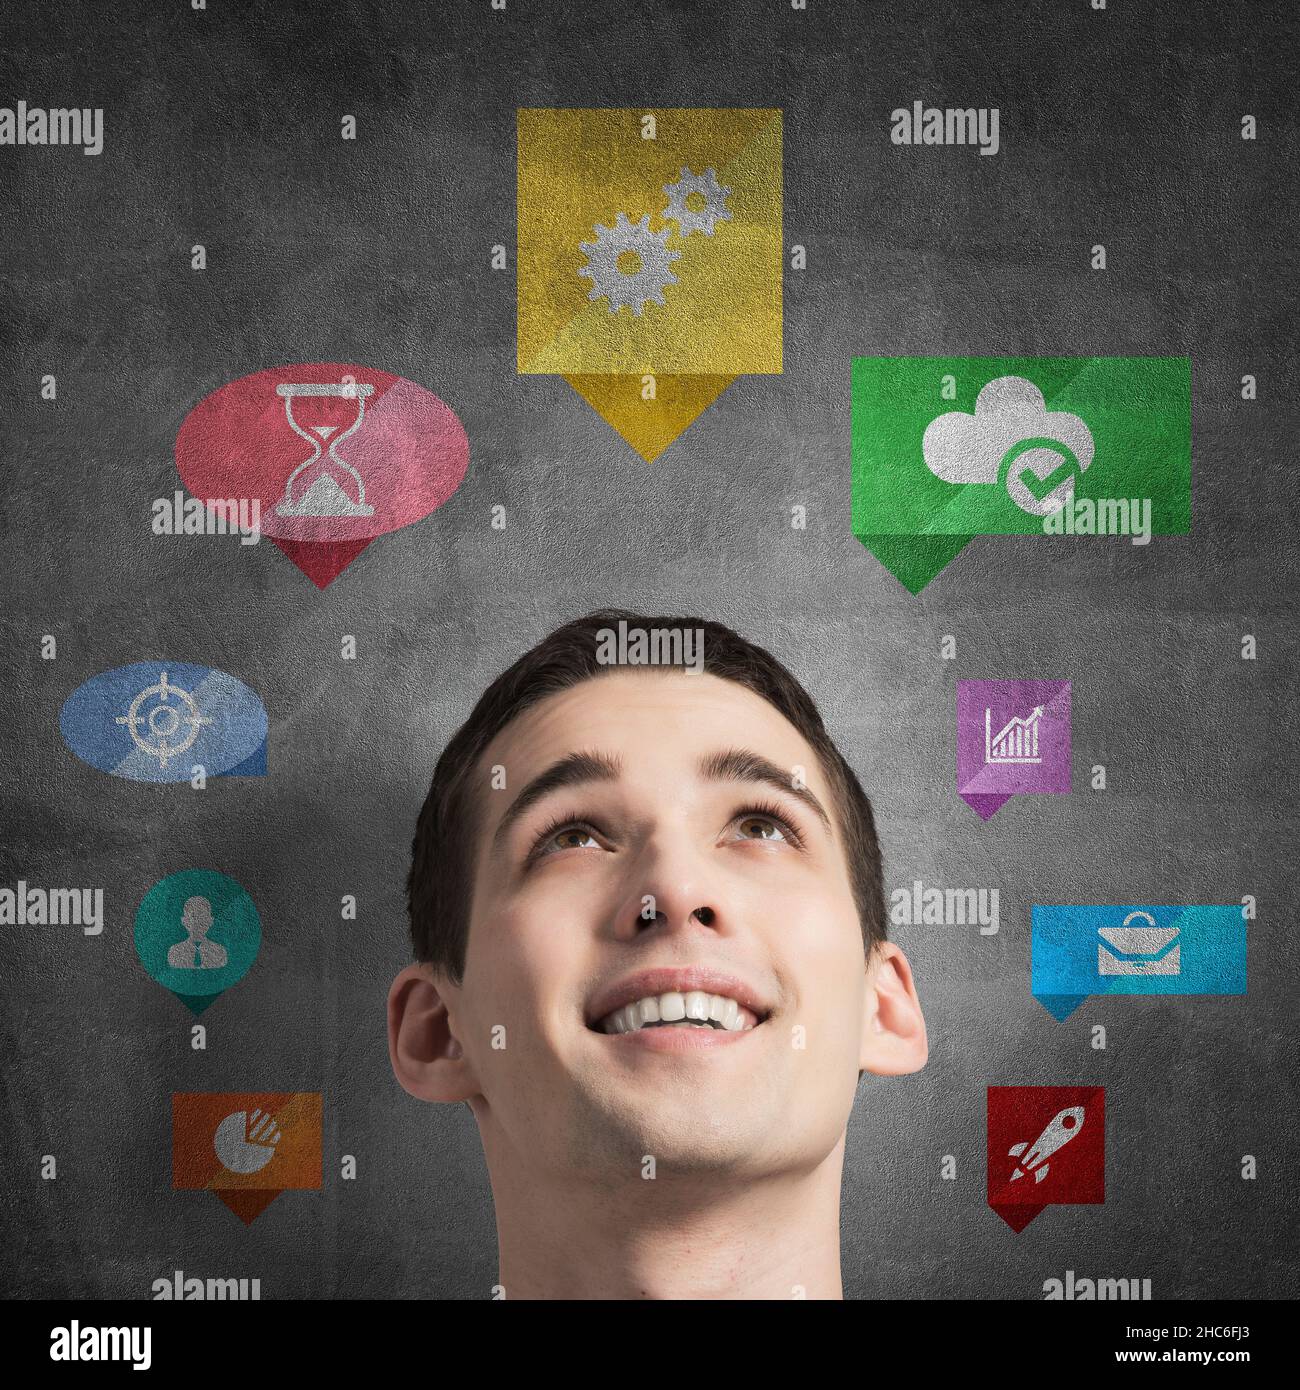 Application icons of media interface Stock Photo